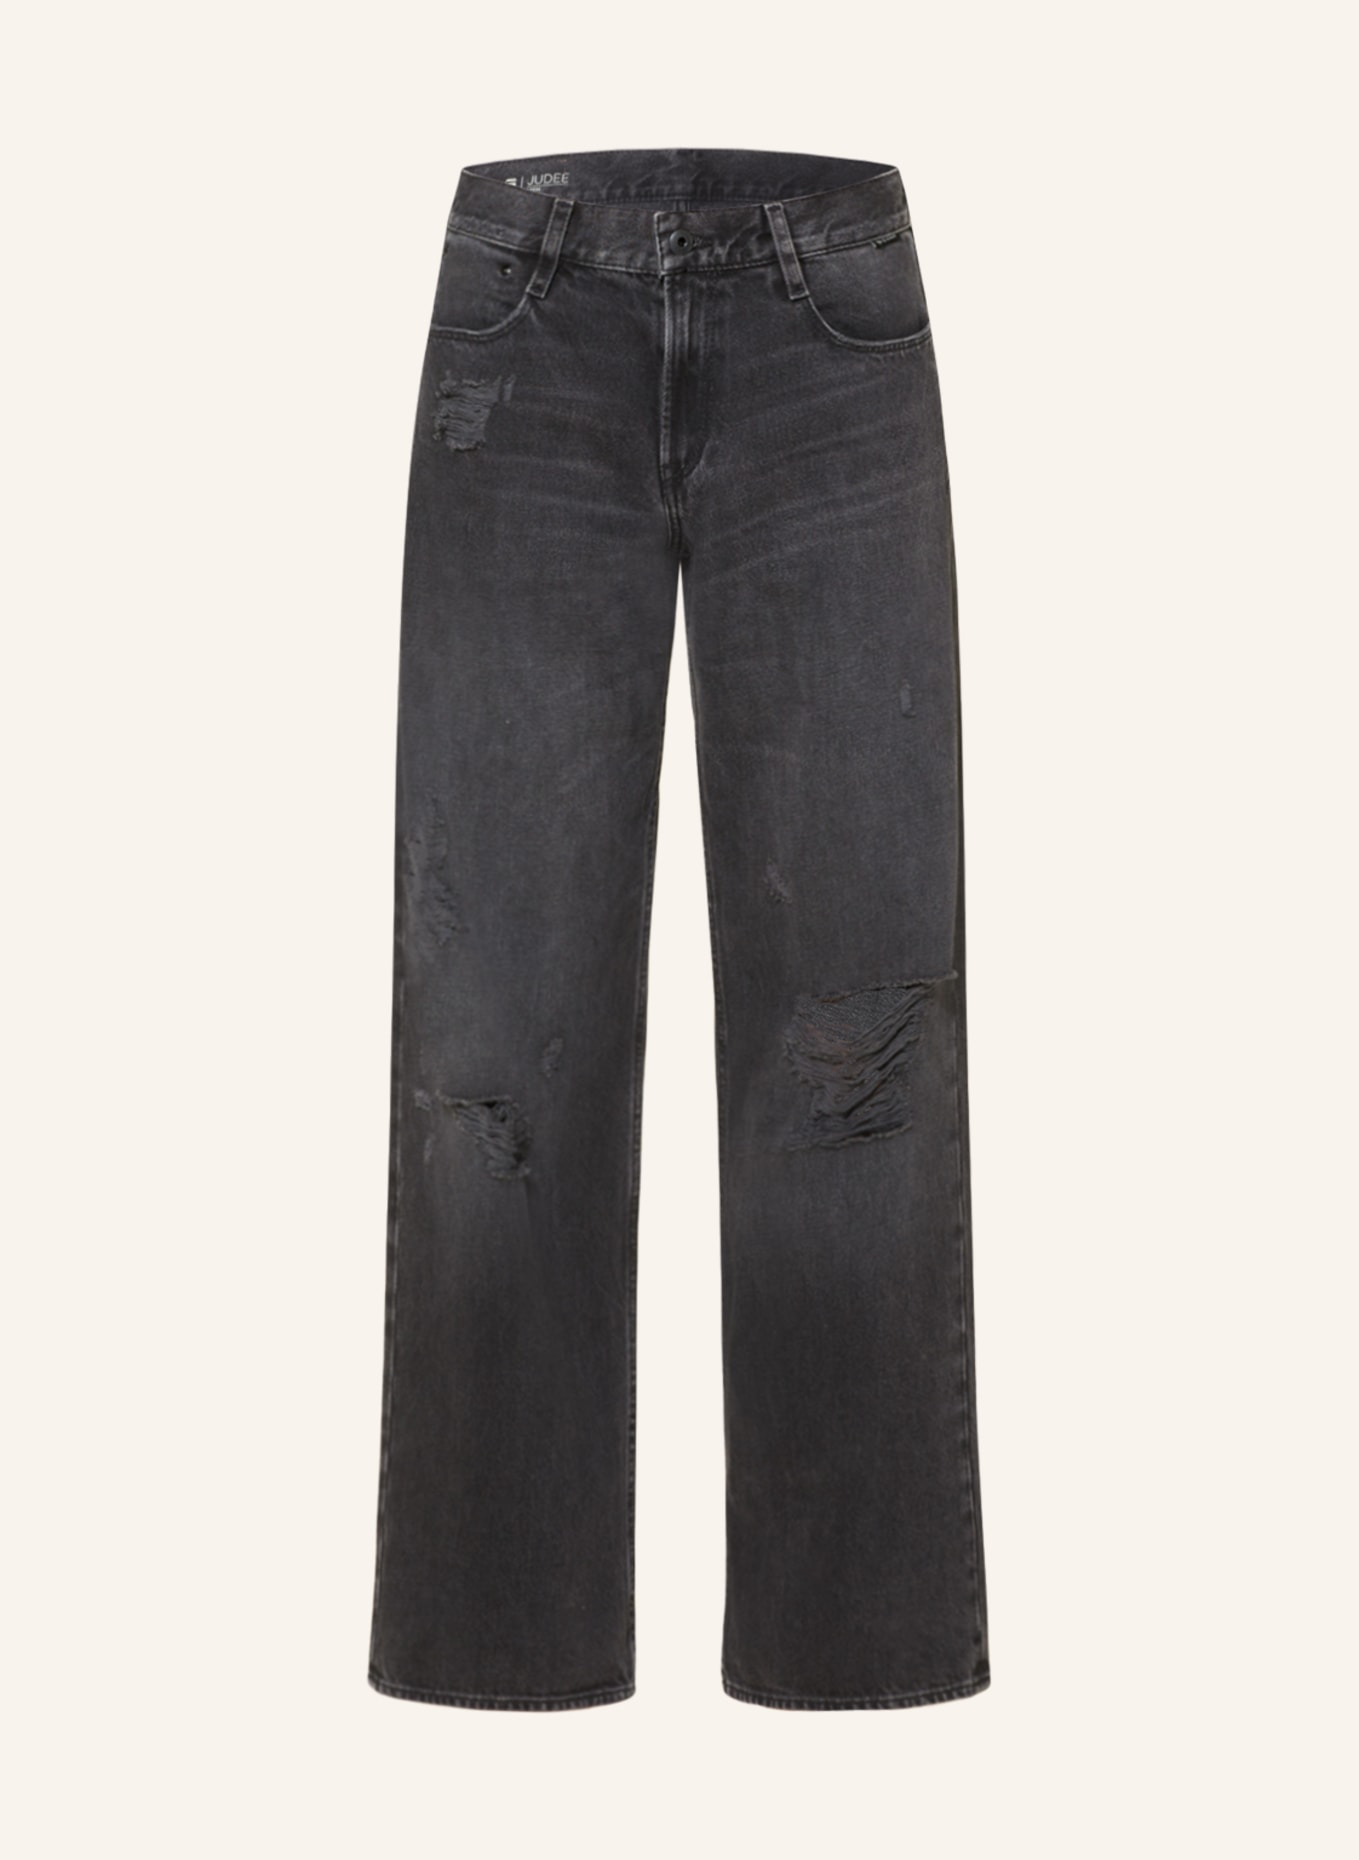 G-Star RAW Jeans JUDEE, Color: G131 worn in black smoke ripped (Image 1)